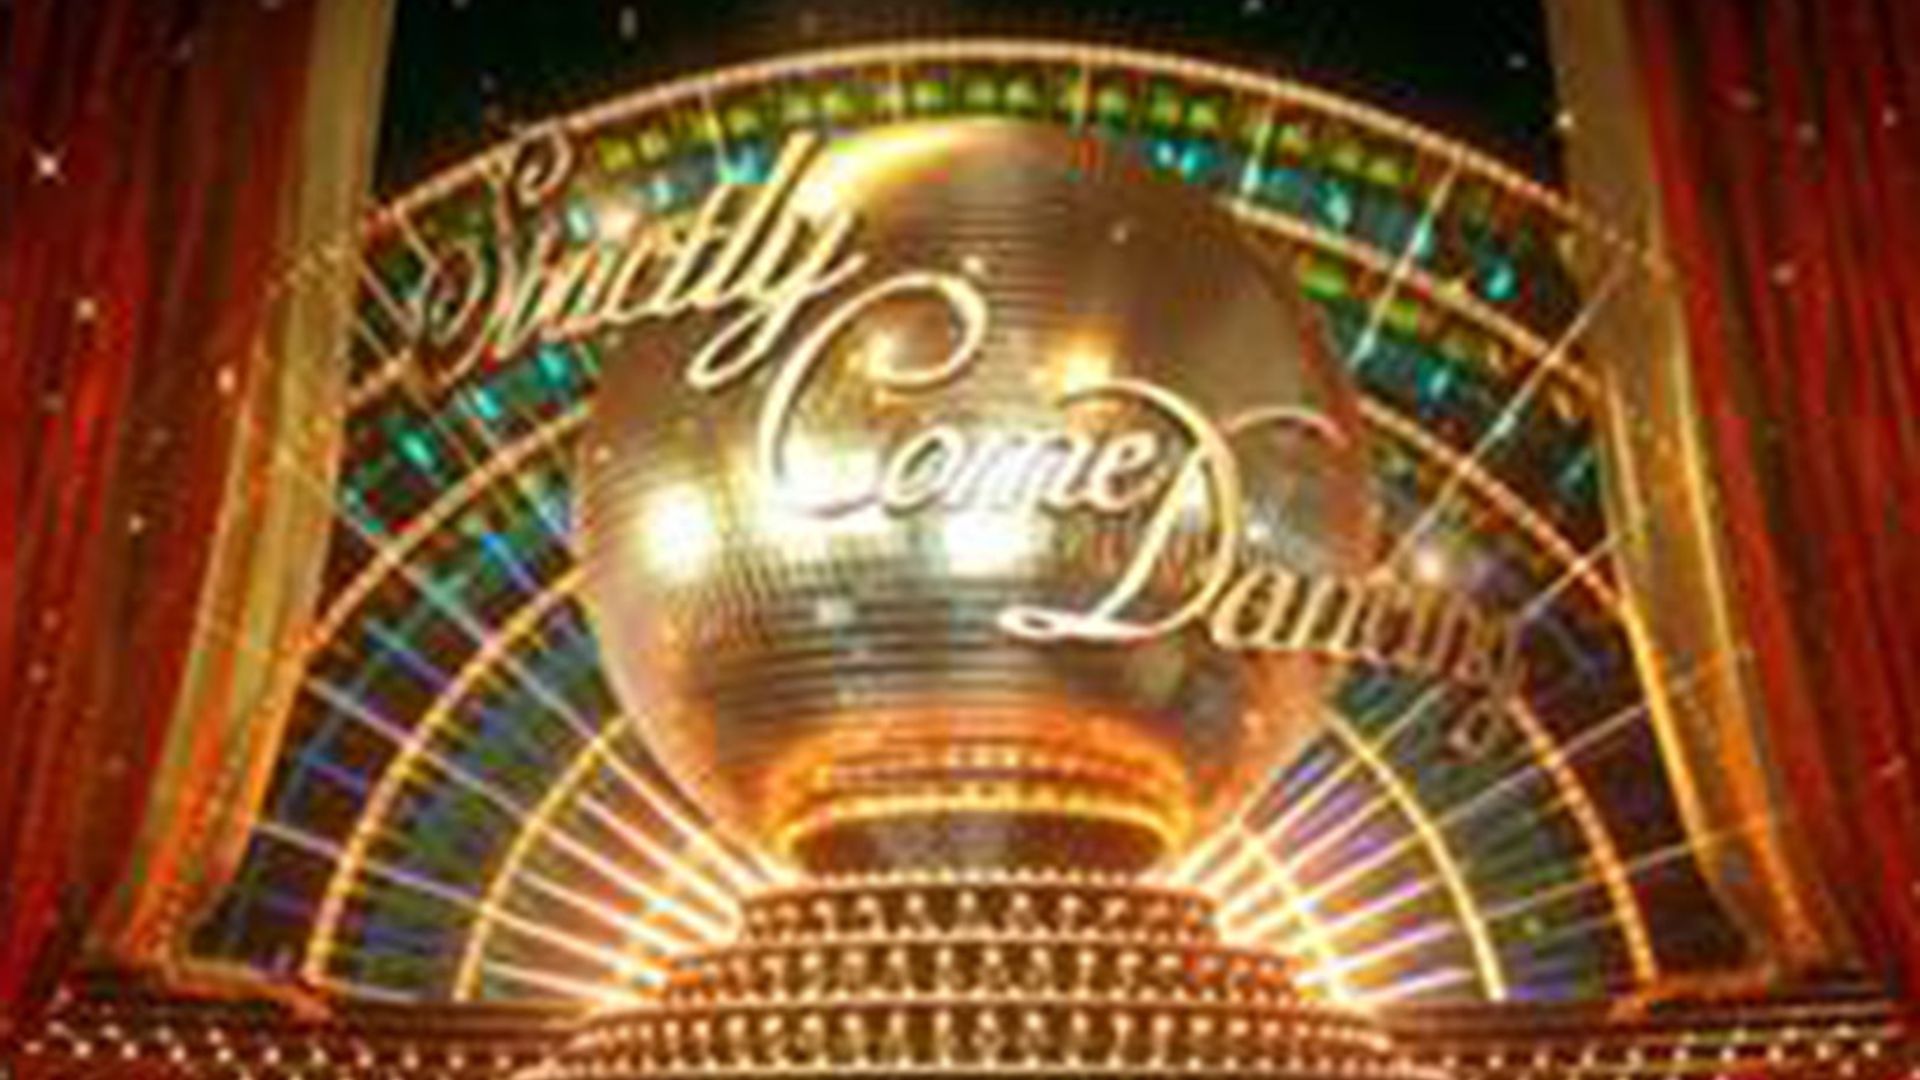 Third celebrity voted off Strictly Come Dancing – find out who!